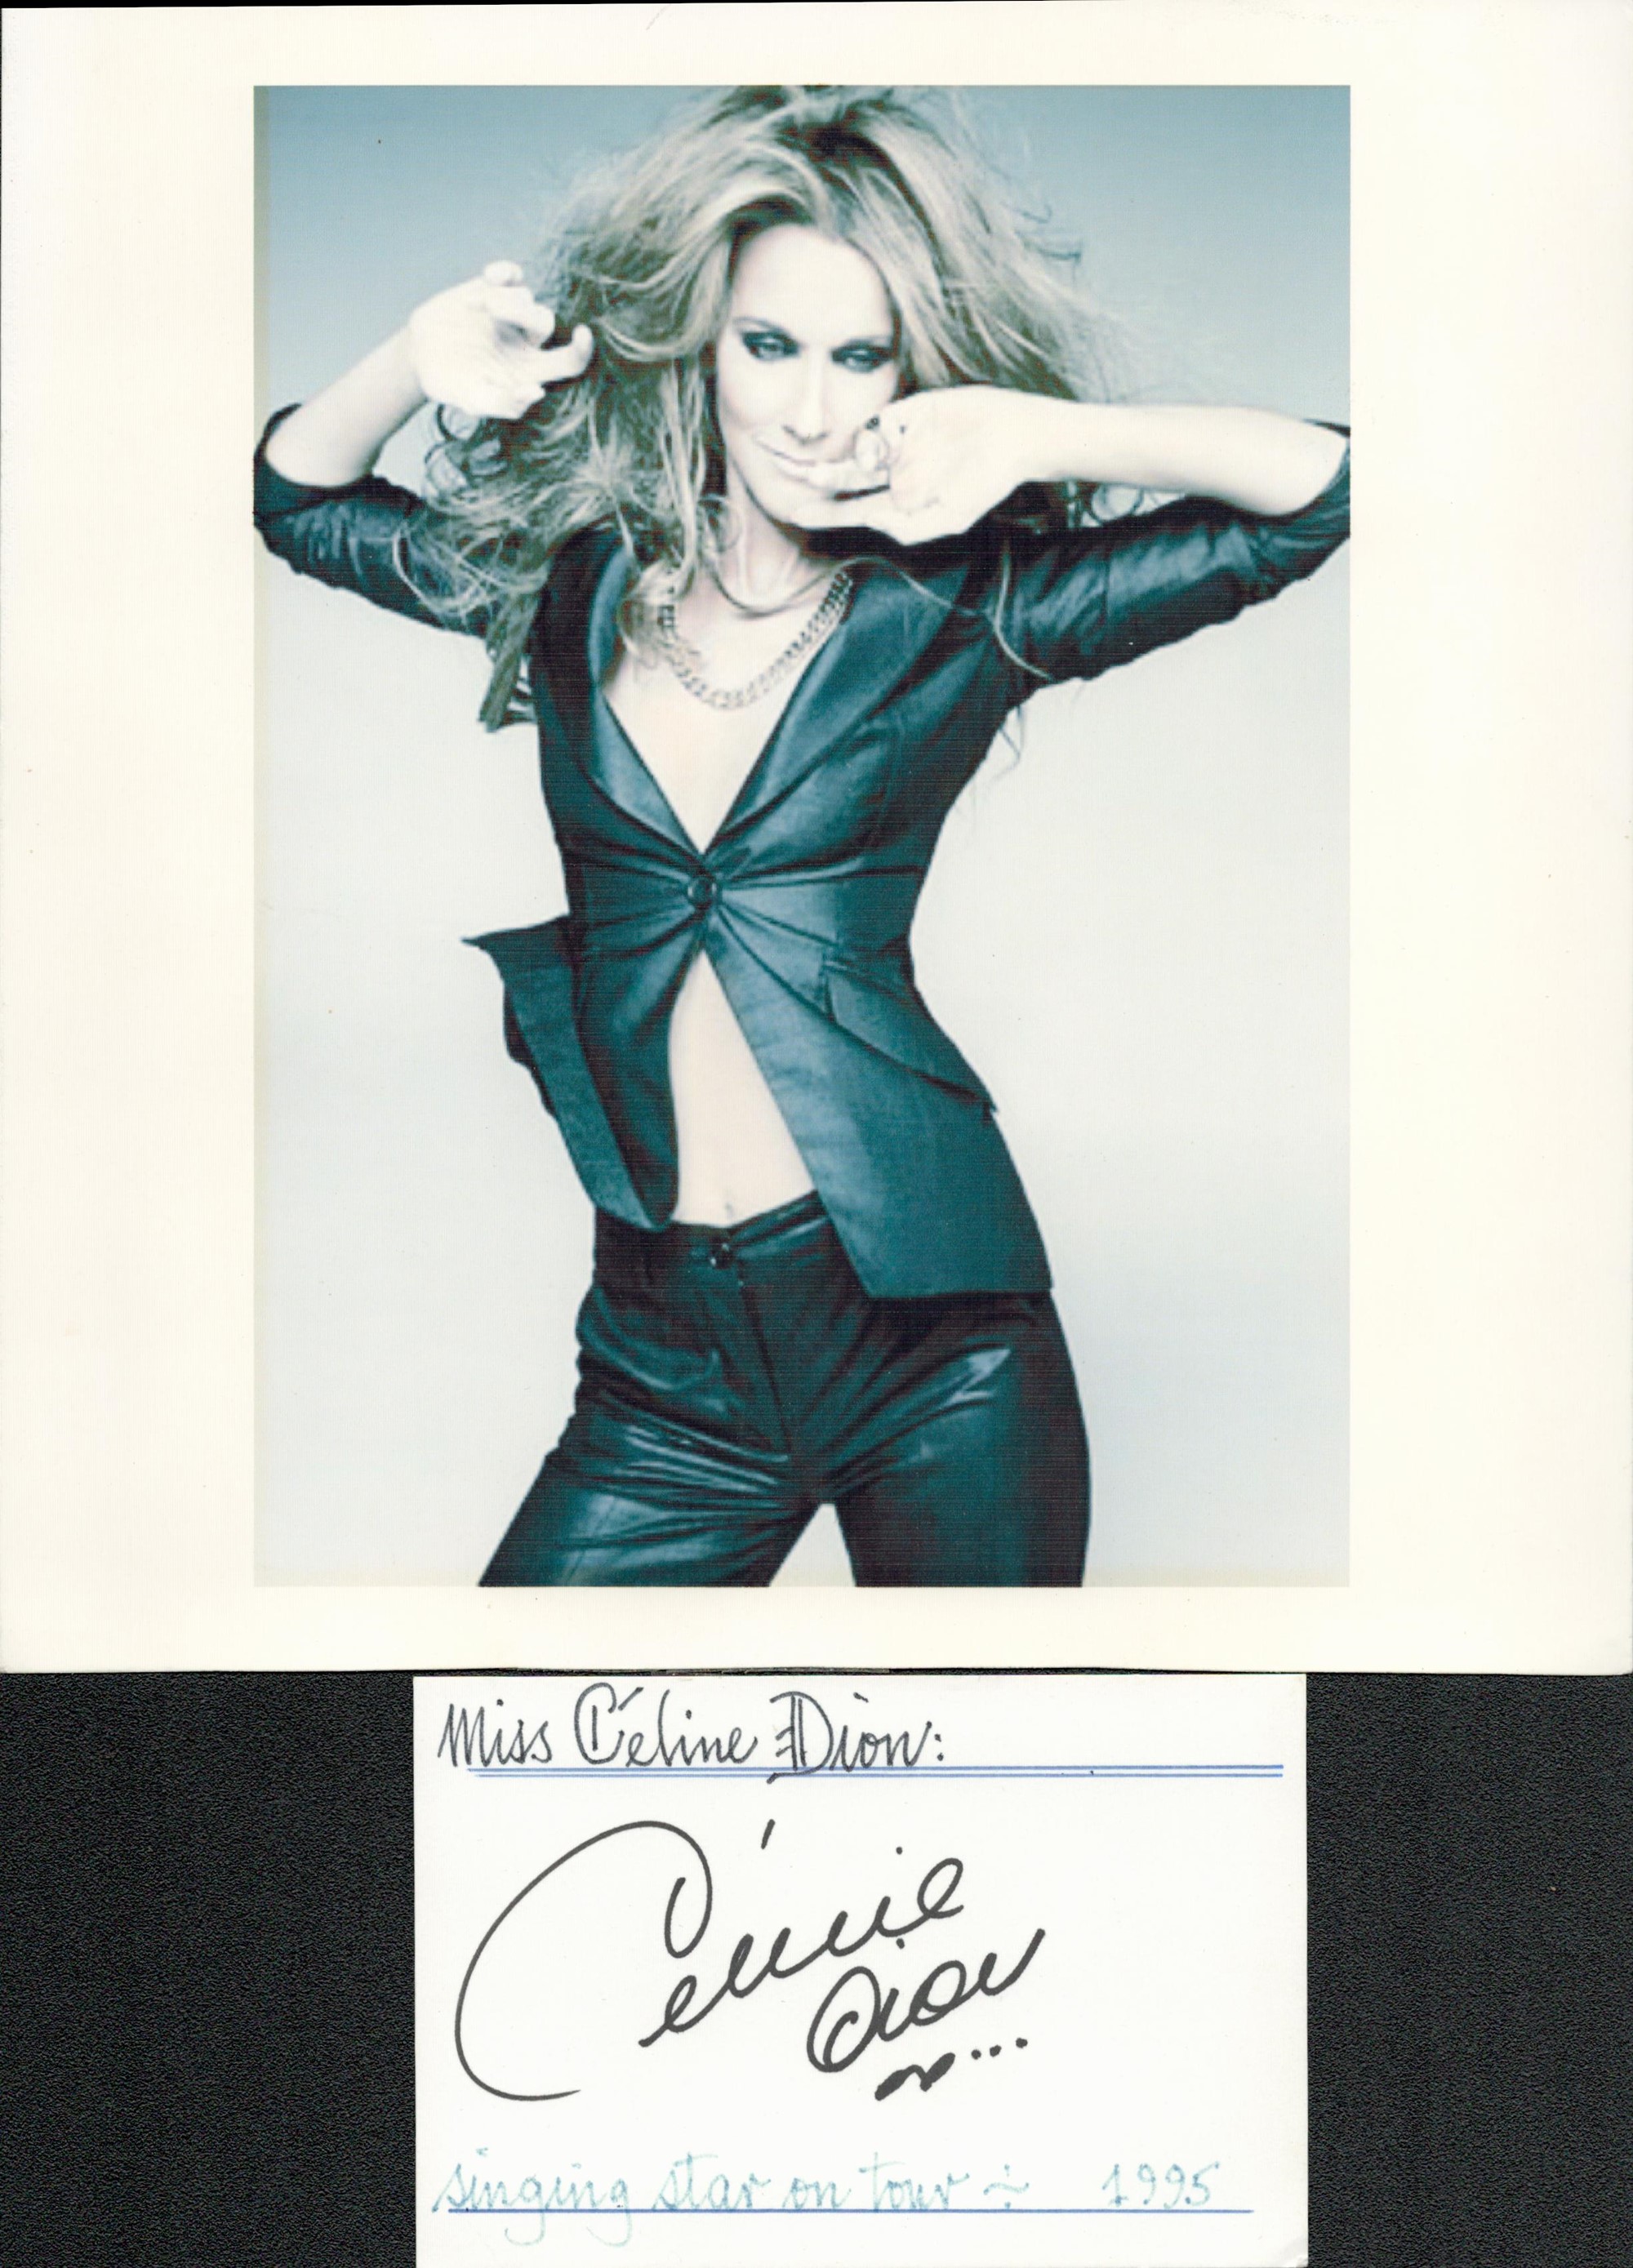 Celine Dion signed 4x3 white card comes with 10x8 colour photo. Good condition. All autographs